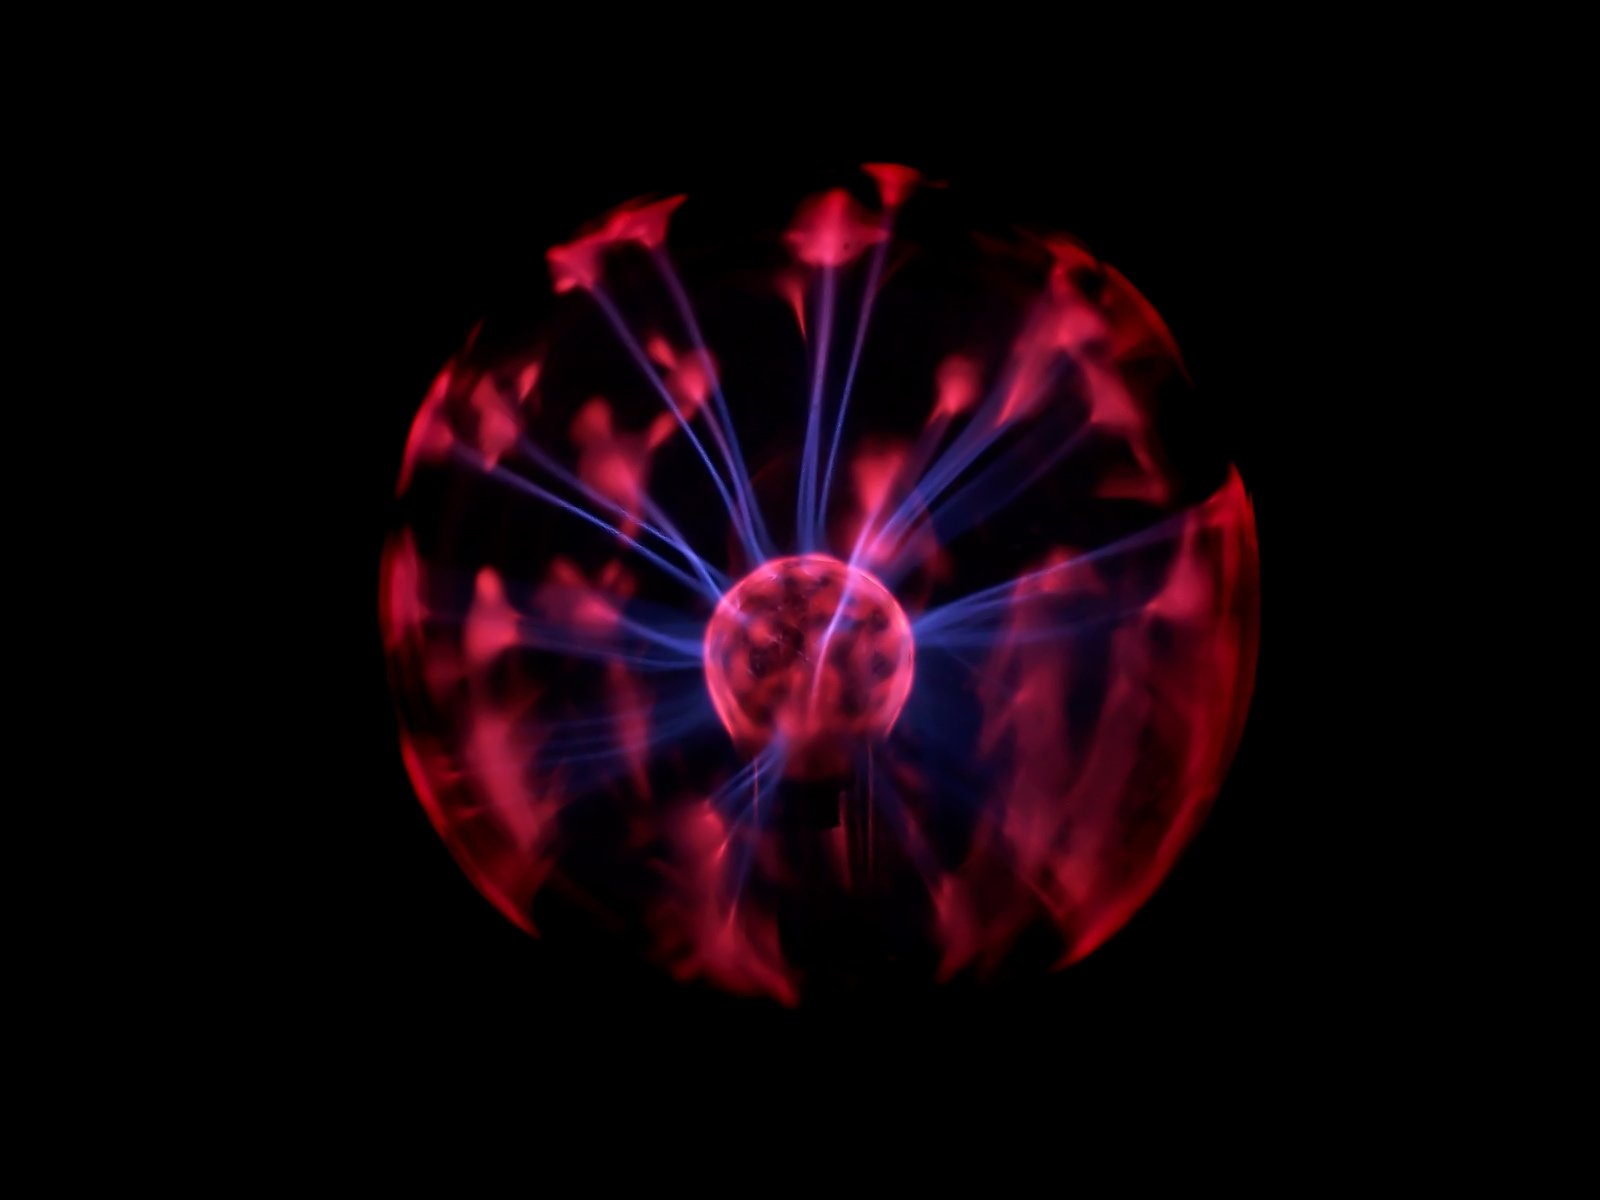 a colorful swirl of light and red blur over black background